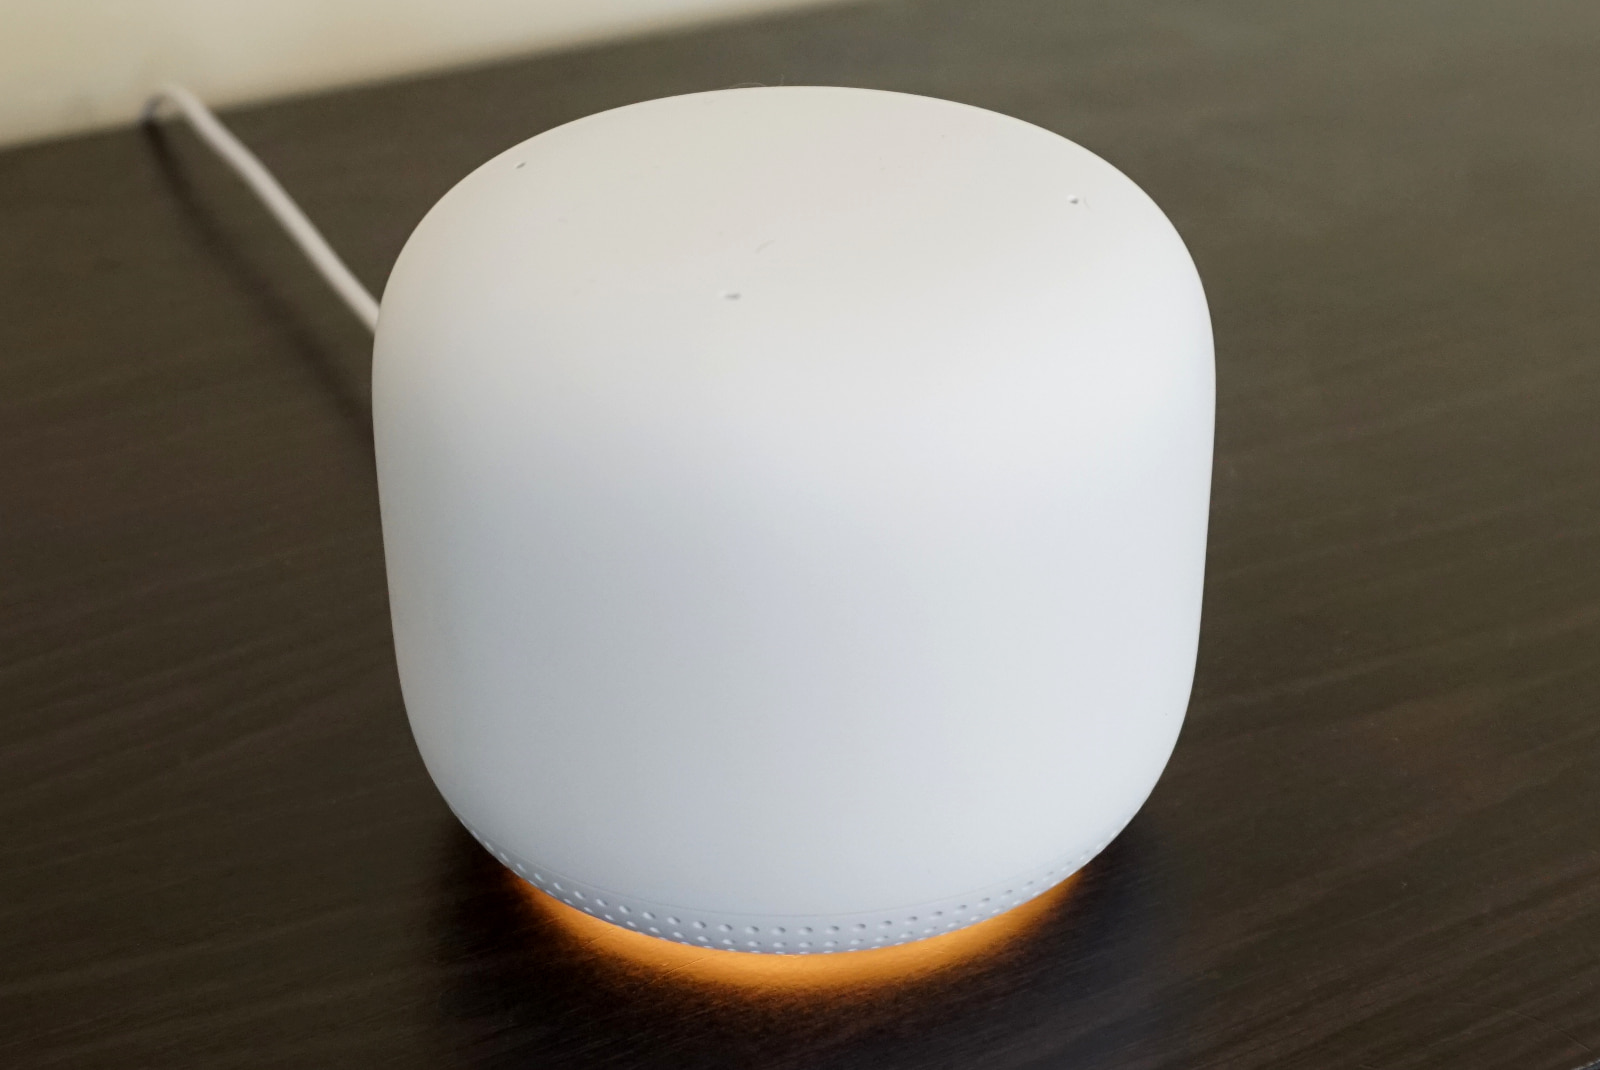 Google Nest Wifi with volume controls on top